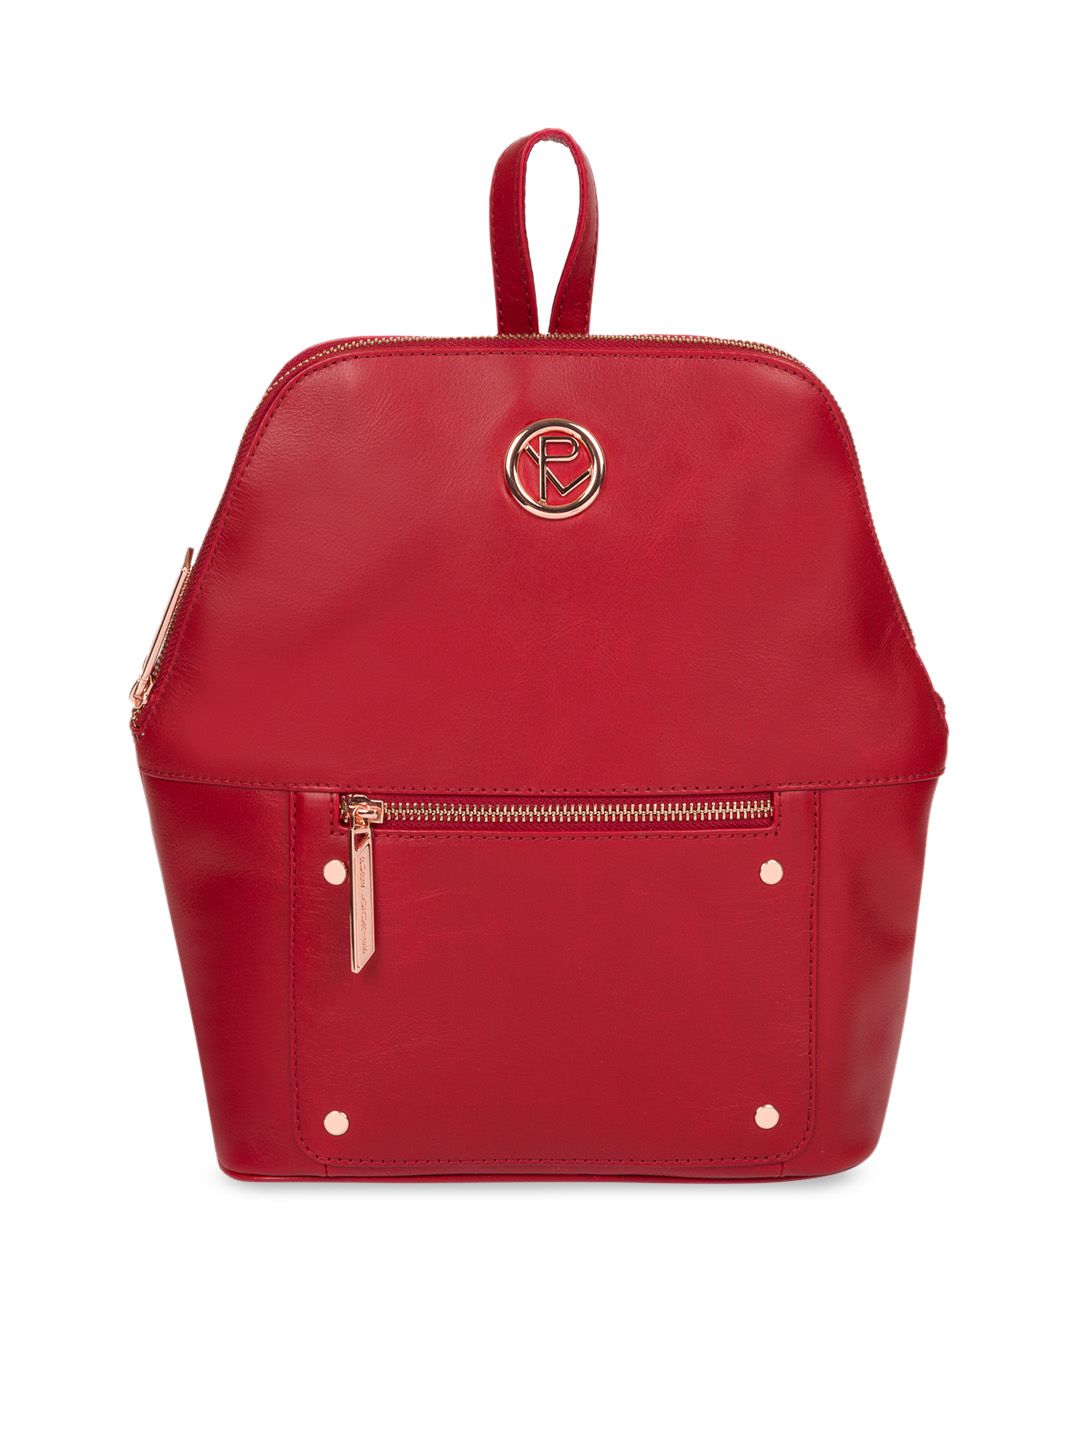 PURE LUXURIES LONDON Women Red Rubens Handcrafted Genuine Leather Solid Backpack Price in India